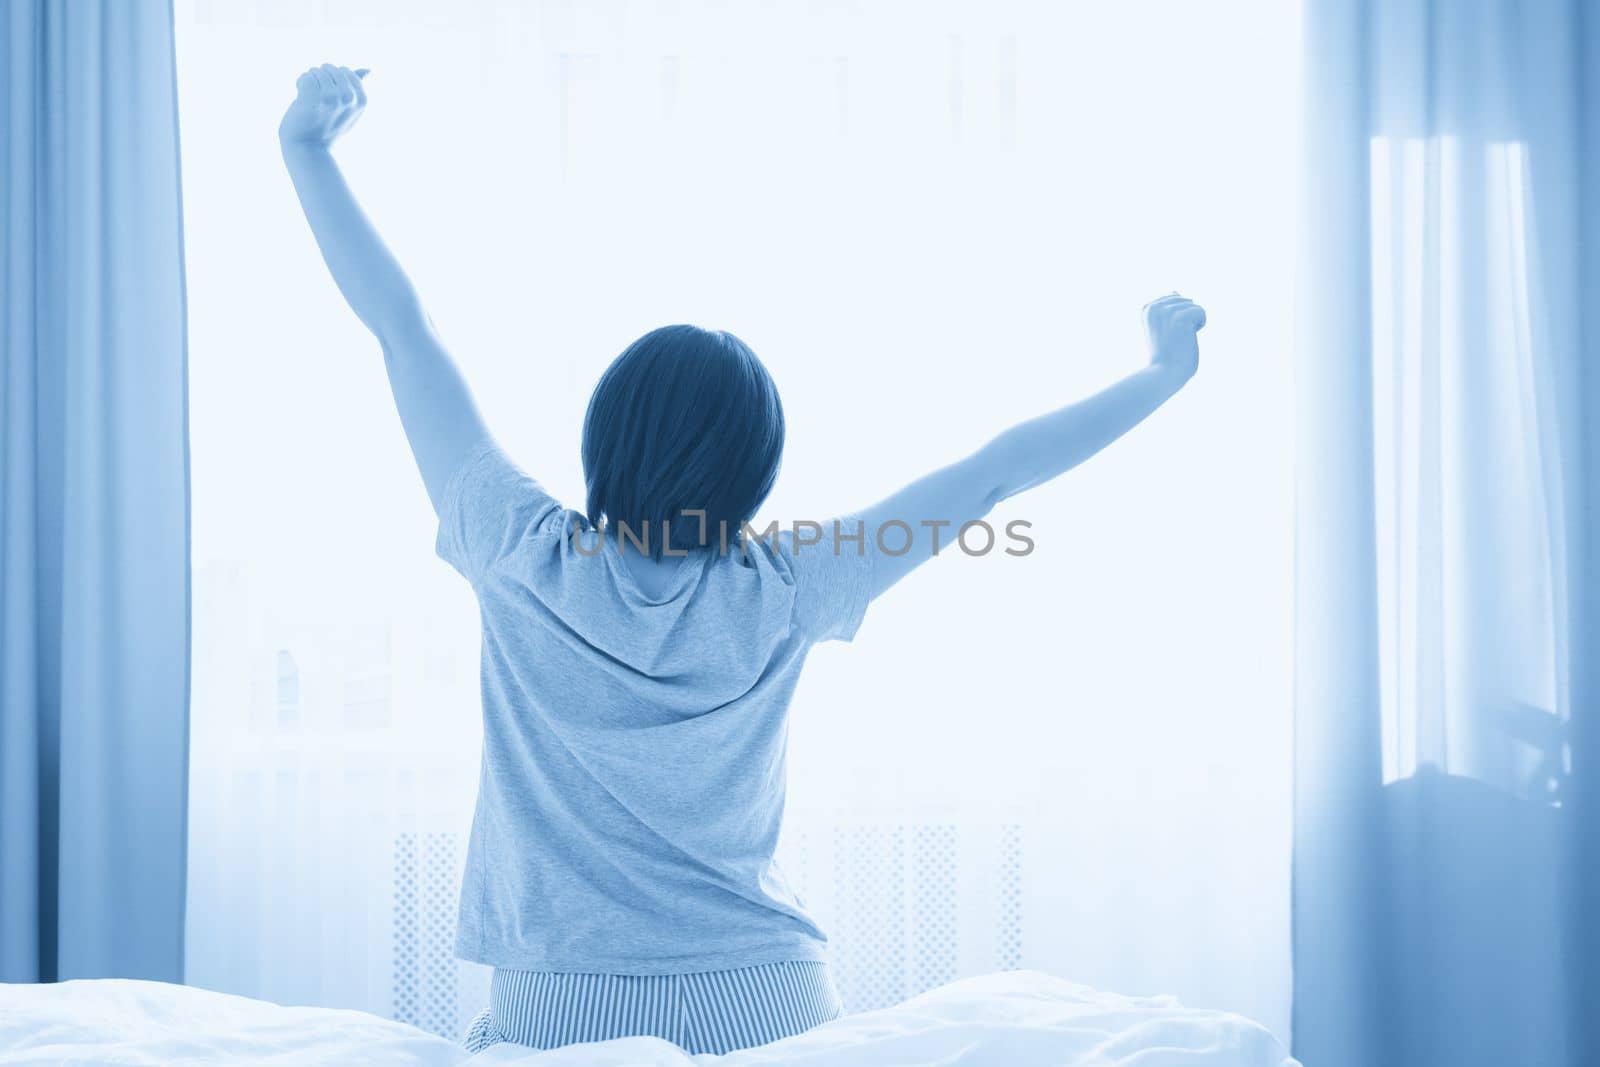 Woman stretching in bed after wake up, back view.